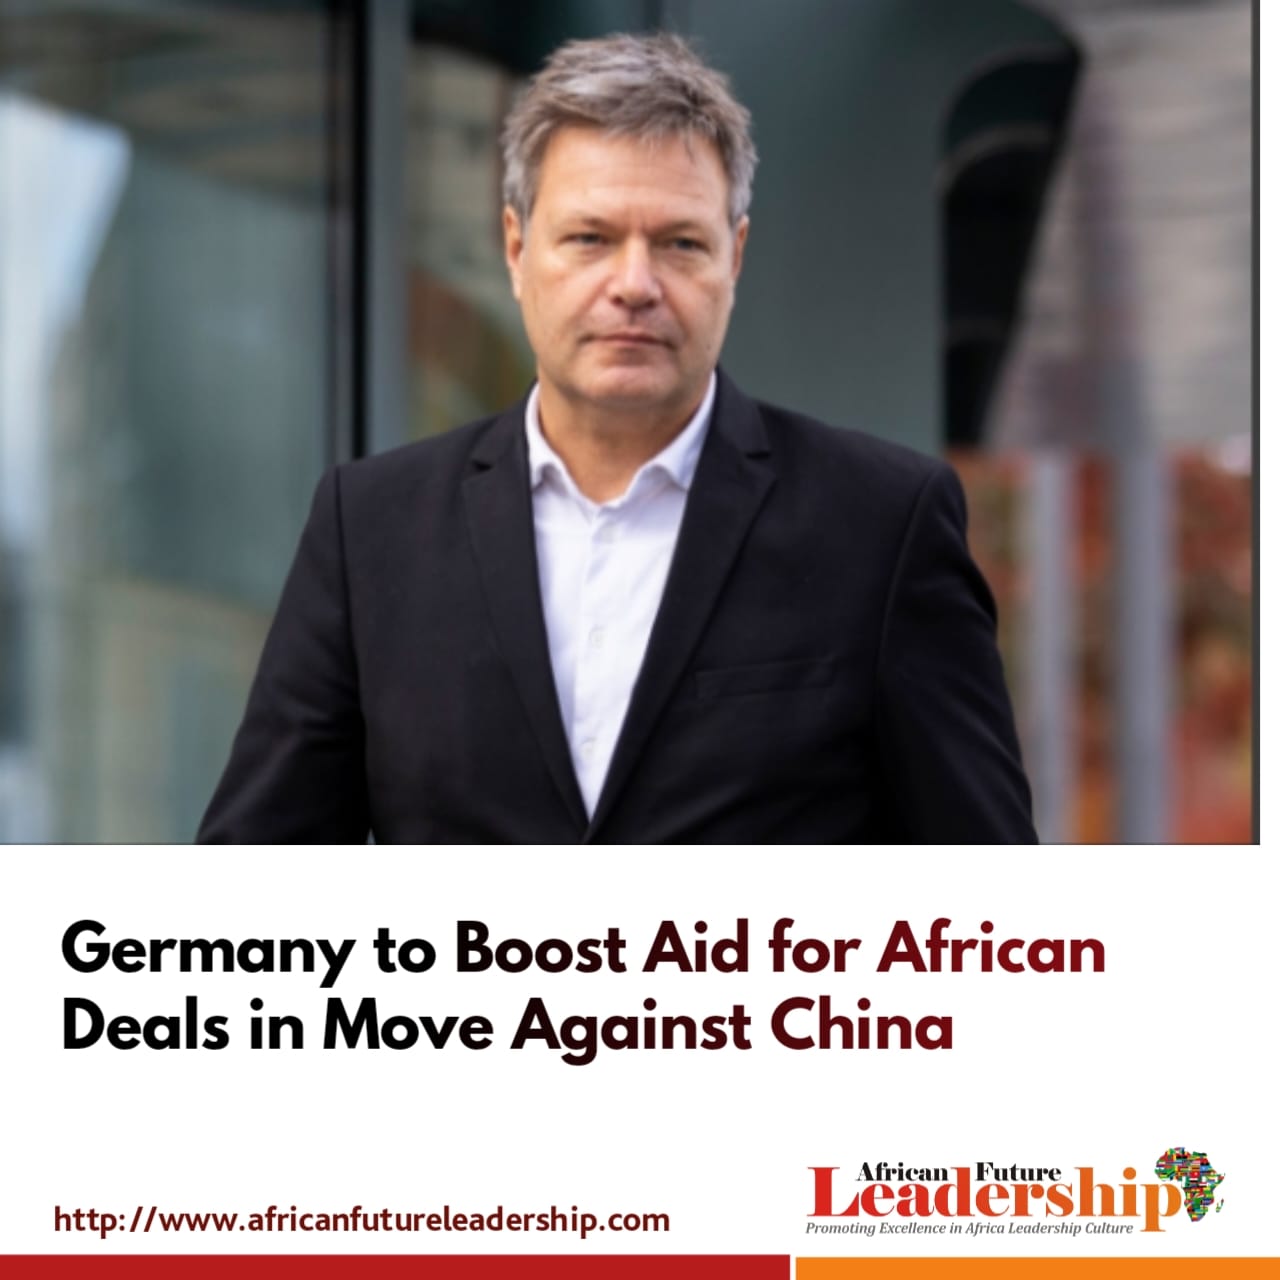 Germany to Boost Aid for African Deals in Move Against China